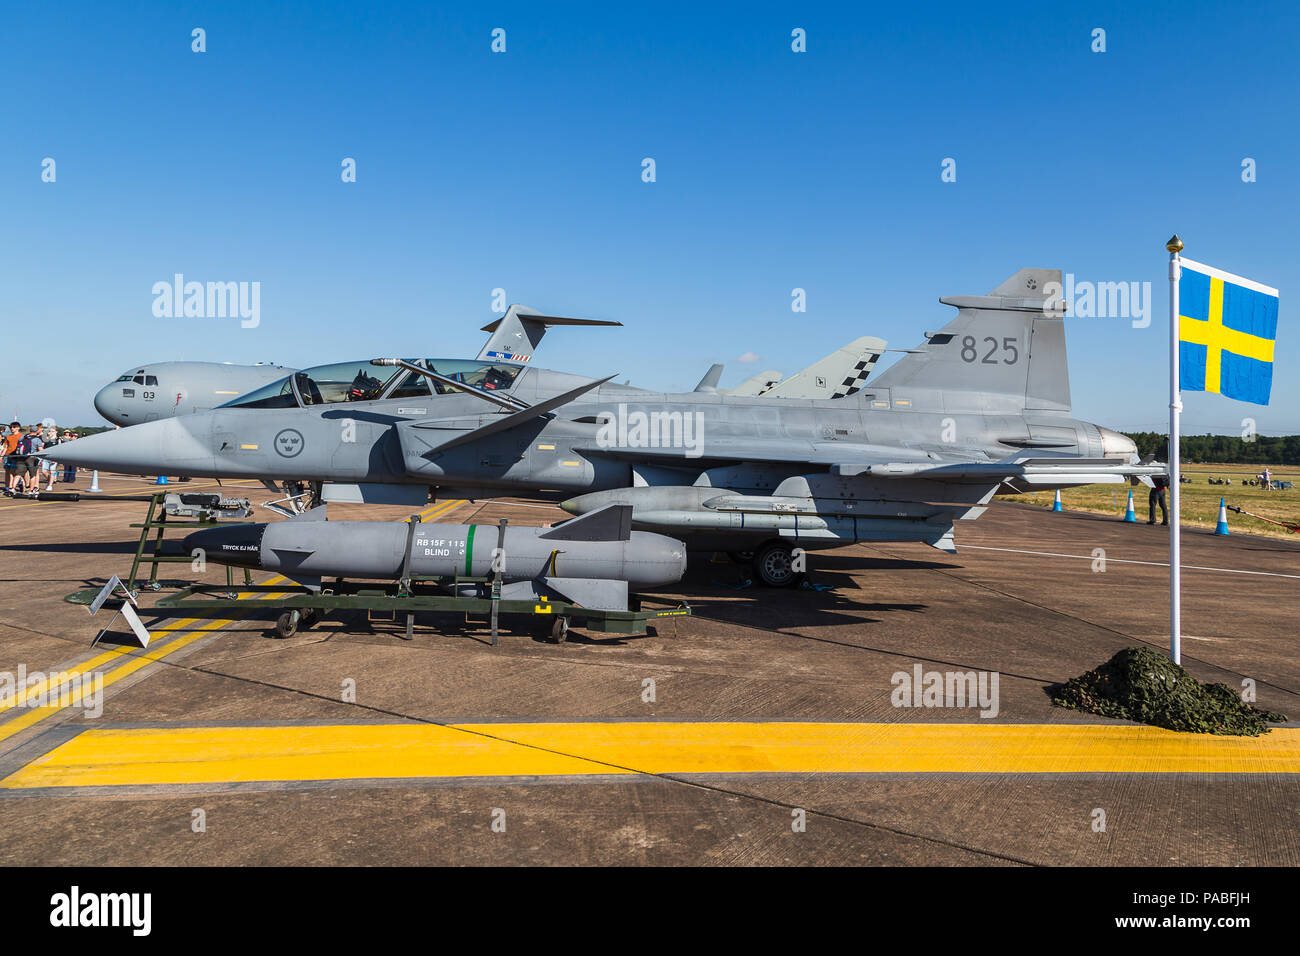 Air Force Gripen pictured at the 2018 International Tattoo at RAF Fairford in Gloucestershire Stock Photo - Alamy